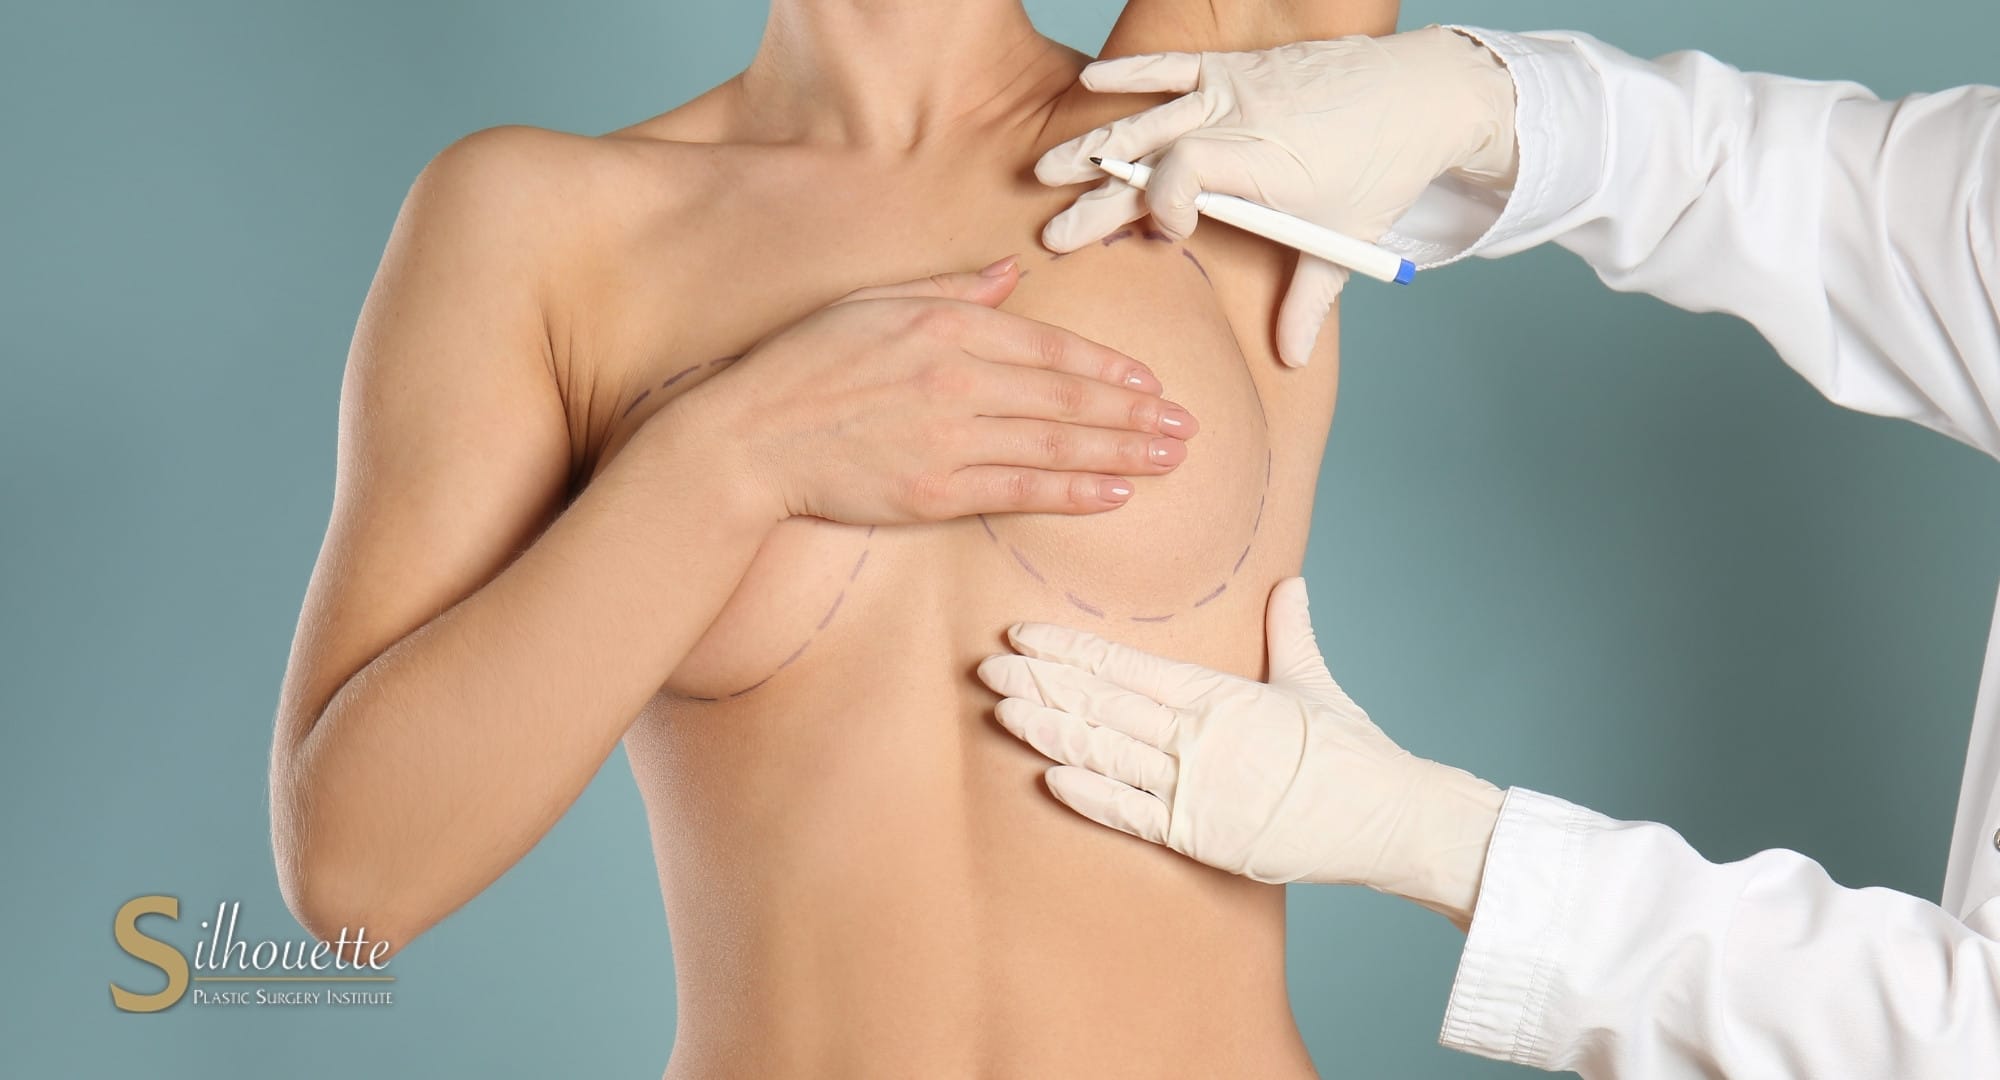 Recovery tips to be kept in mind following the breast reduction